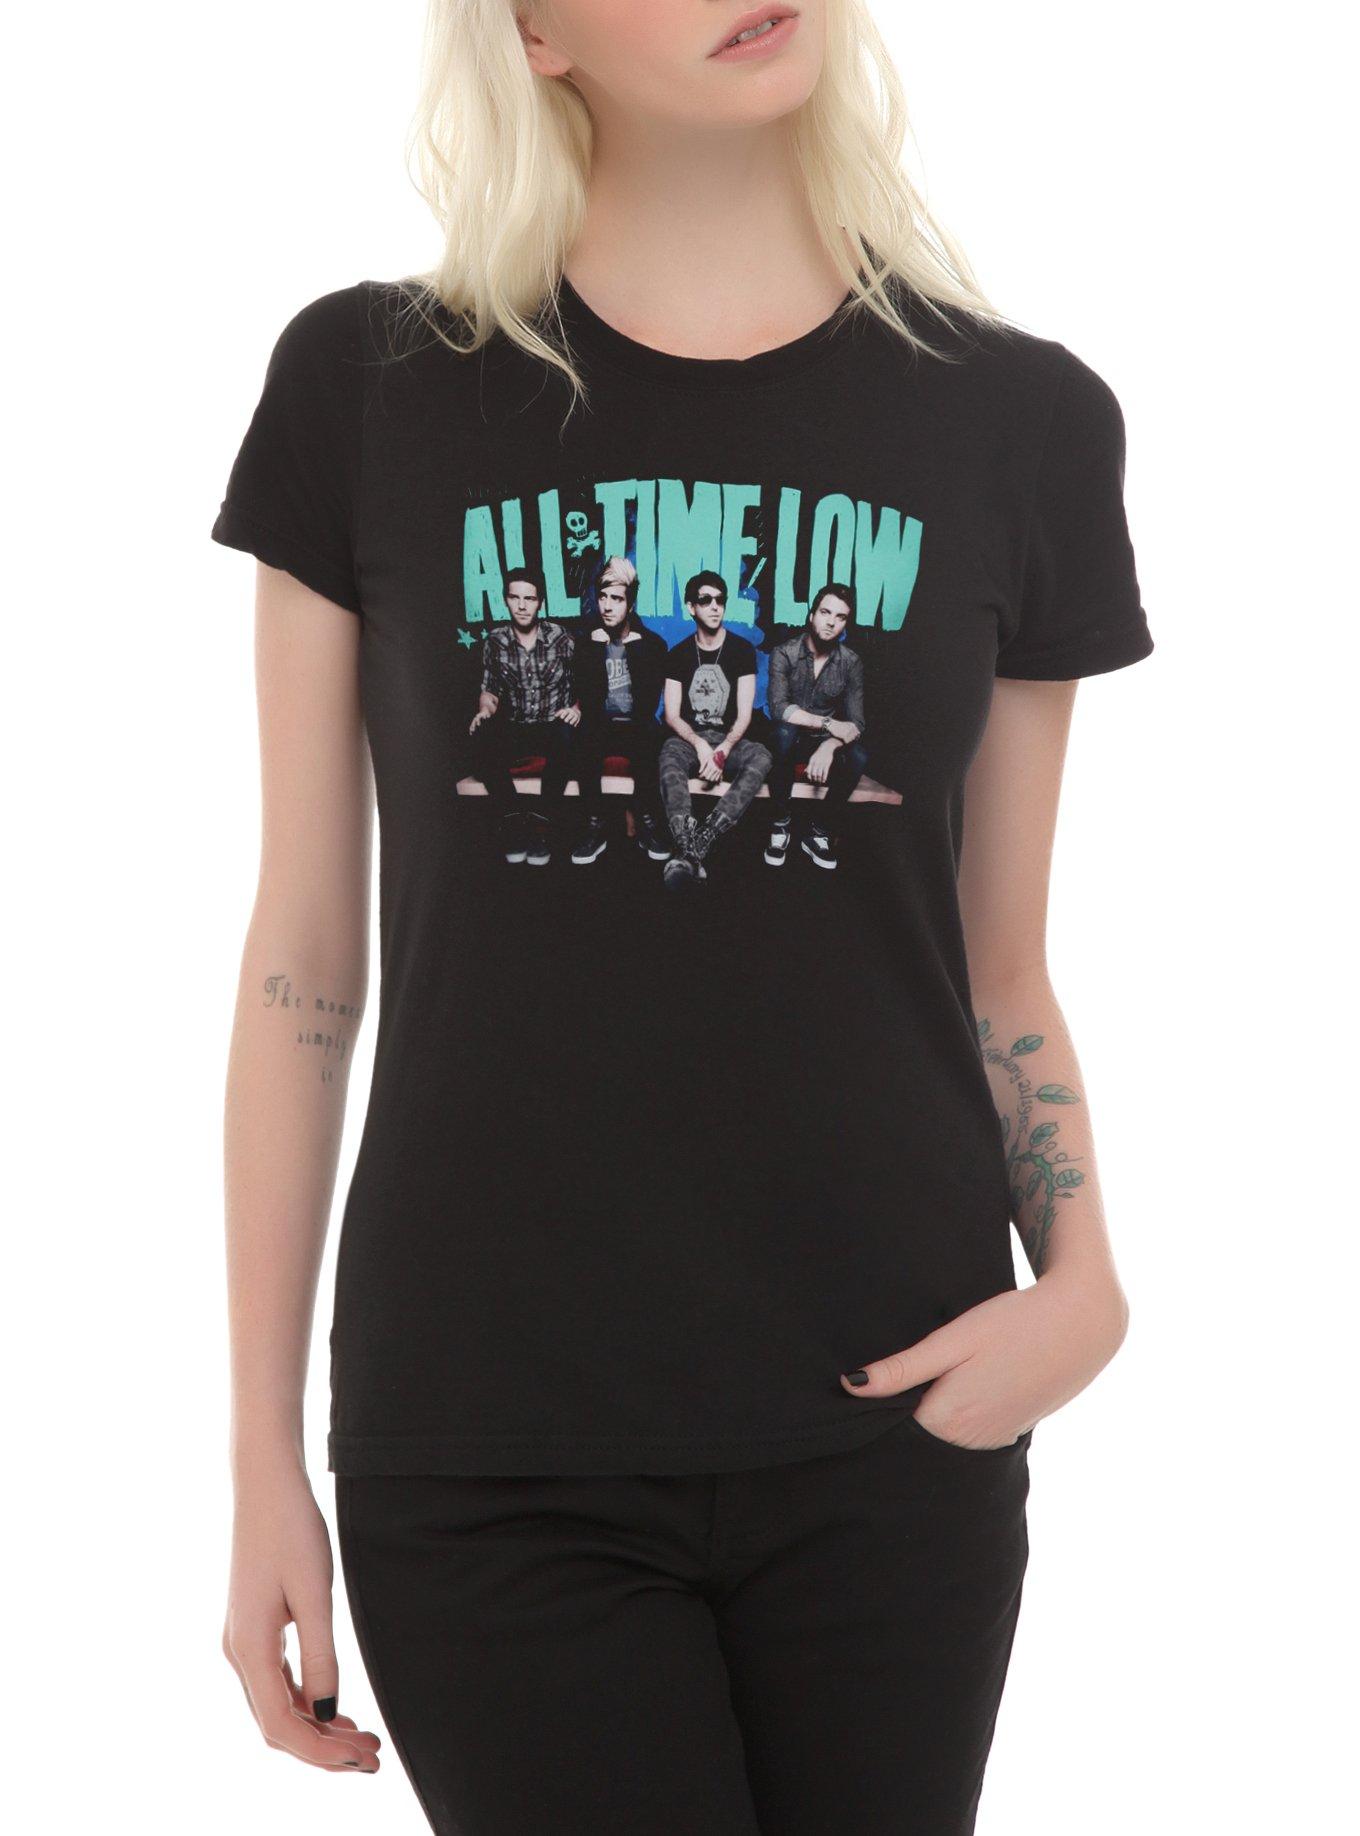 All Time Low Band Photo Girls T-Shirt, BLACK, hi-res